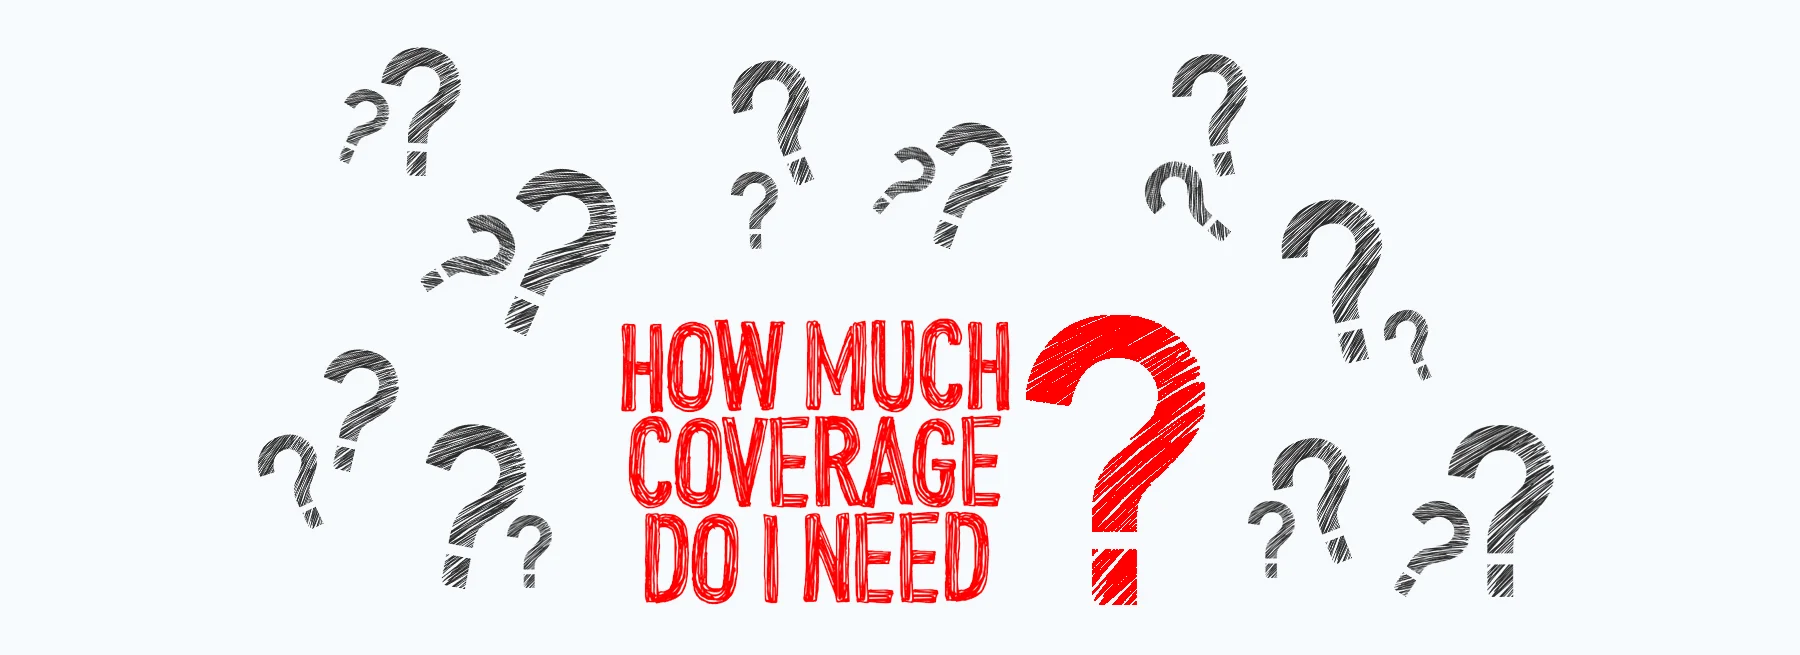 How Much Medicare Coverage Do I Need? Red letters surrounded by many black question marks